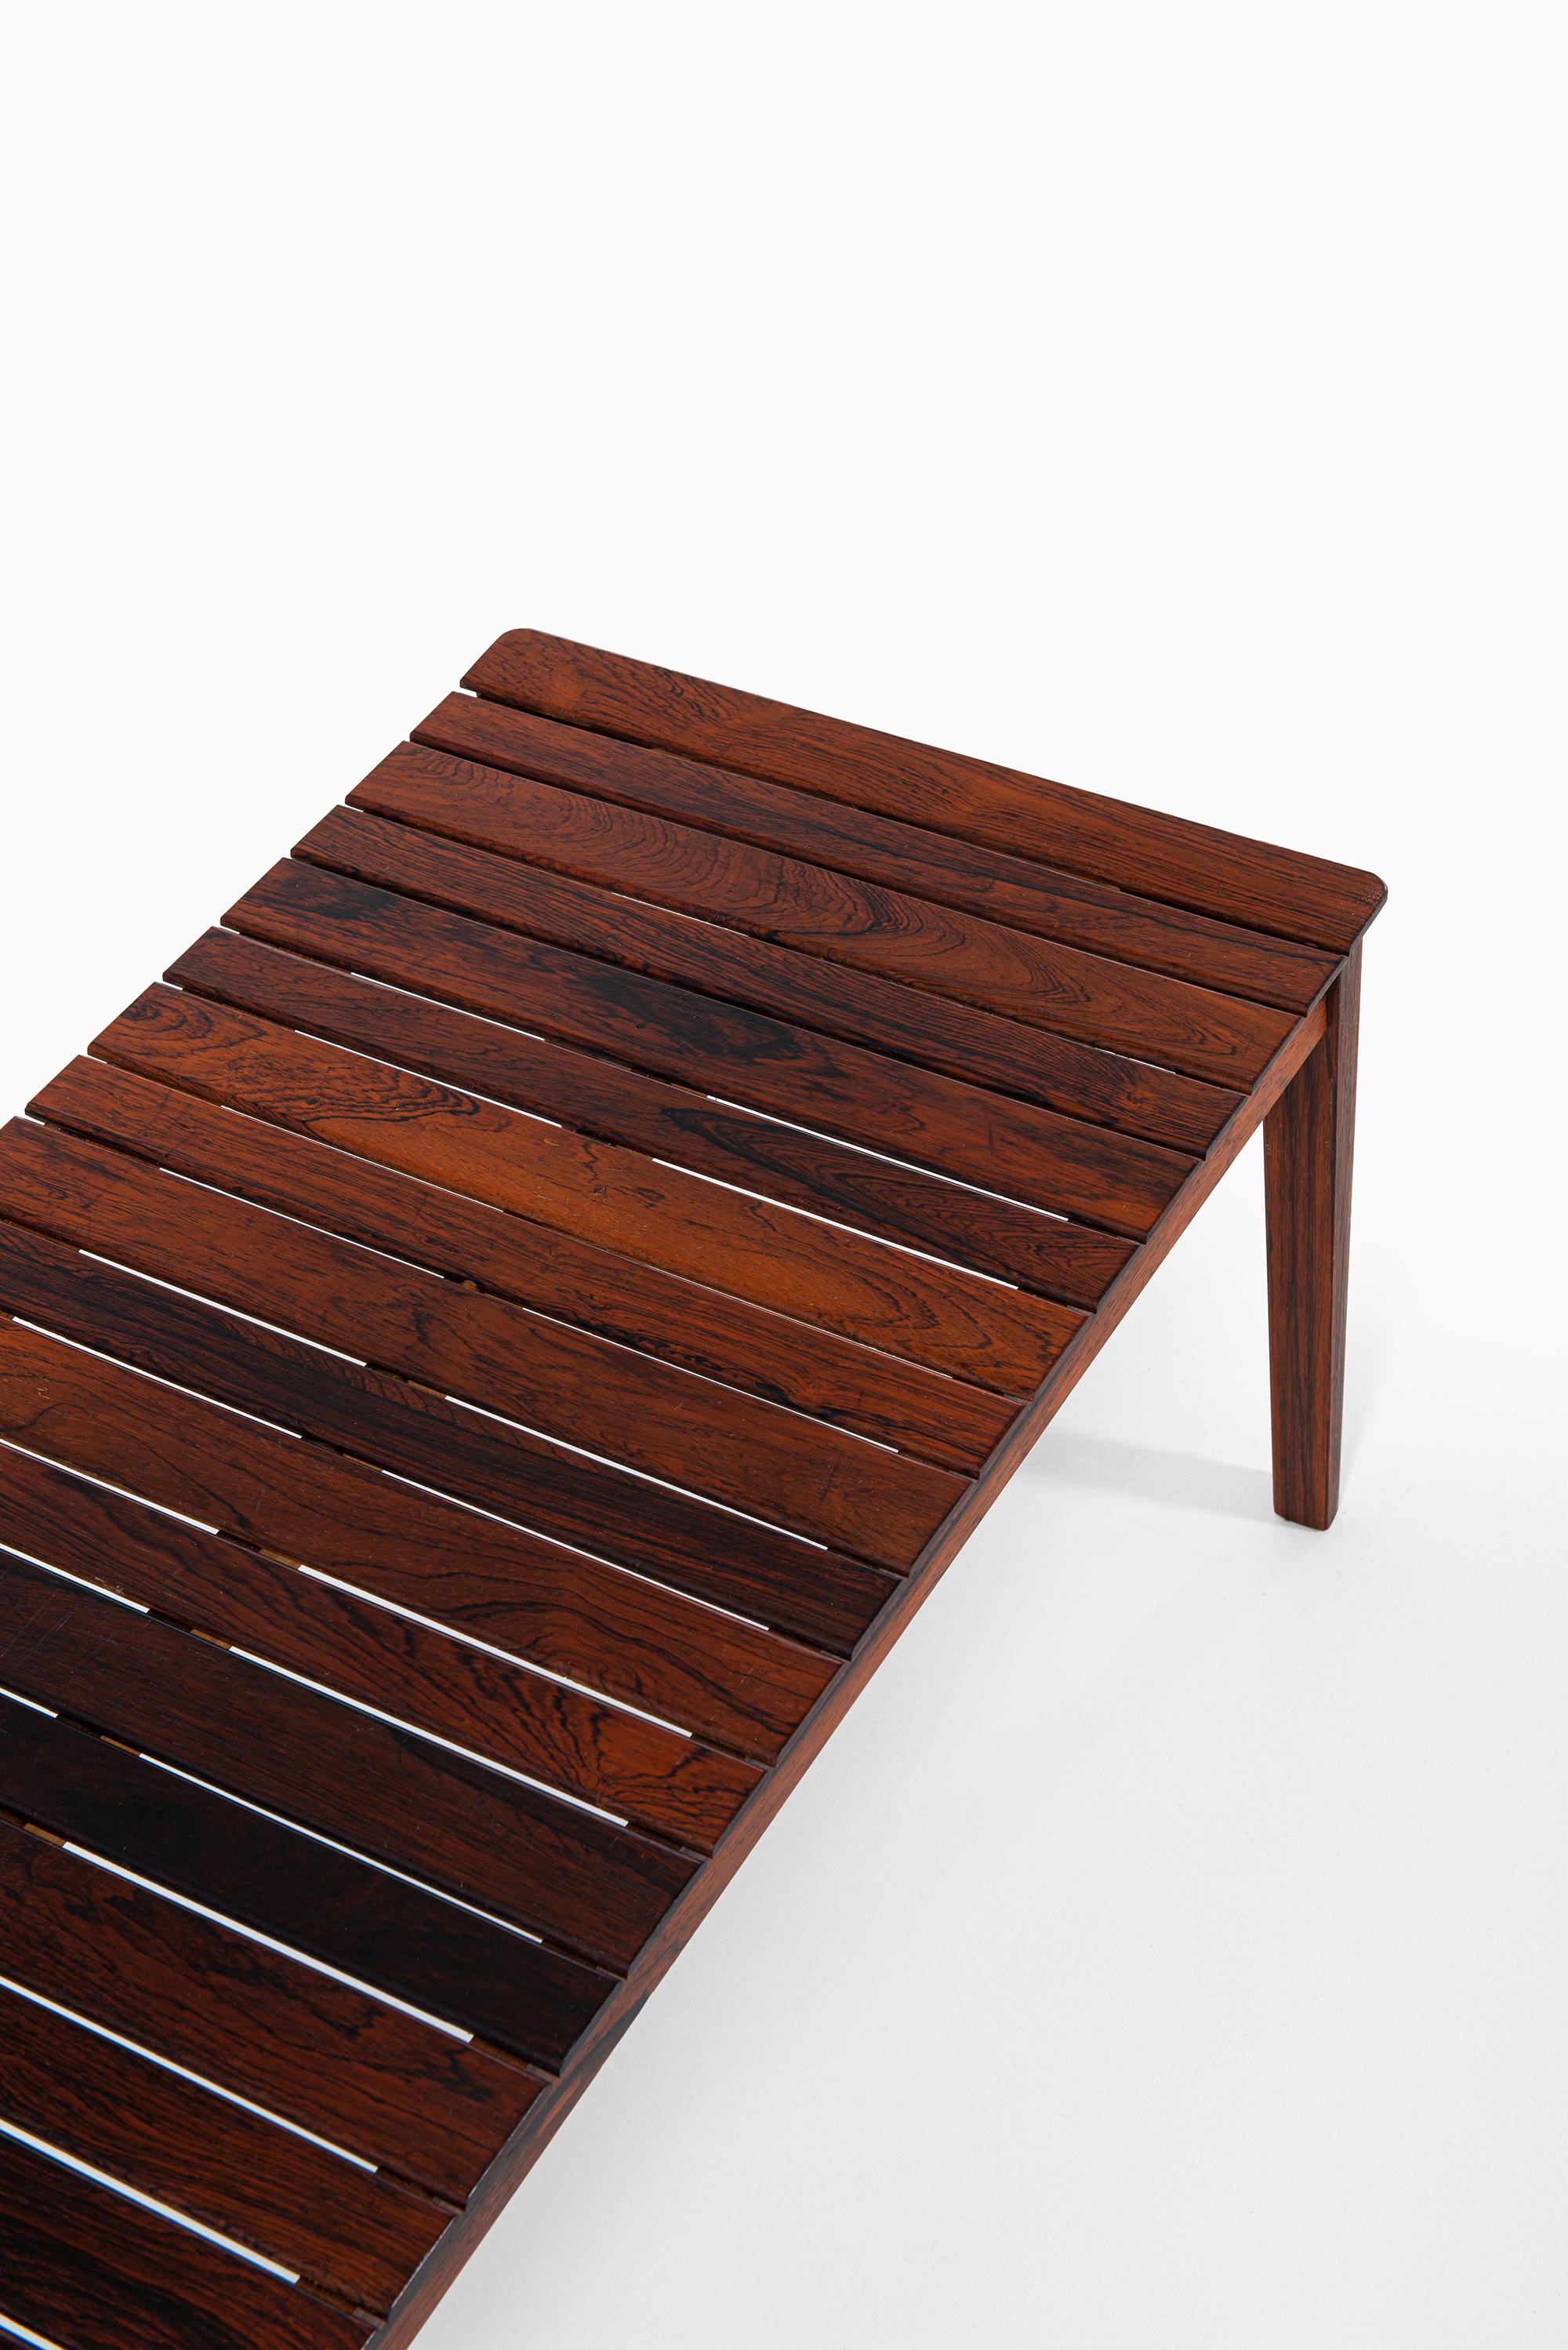 Scandinavian Modern Side Table / Bench in Solid Rosewood Produced by Alberts in Tibro, Sweden